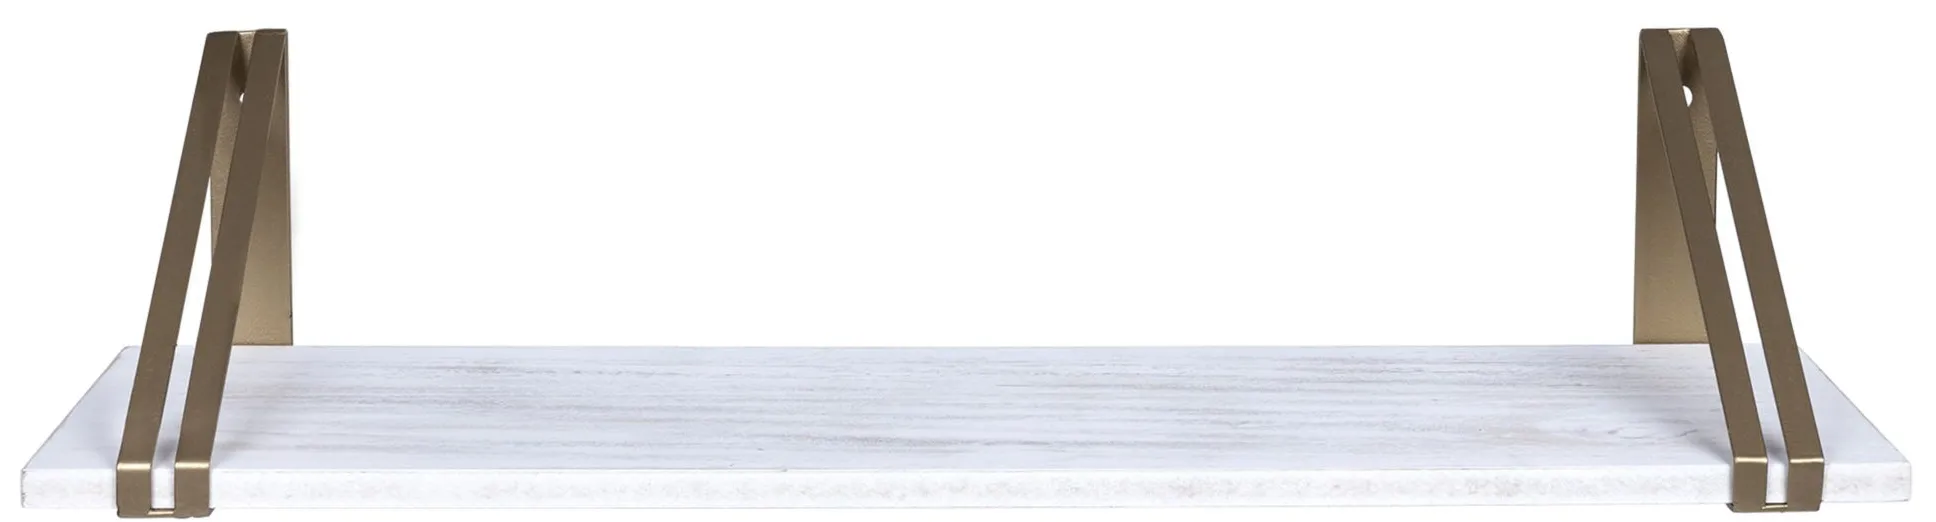 Fisburne Wall Mounted Shelf in White by Stratton Home Decor